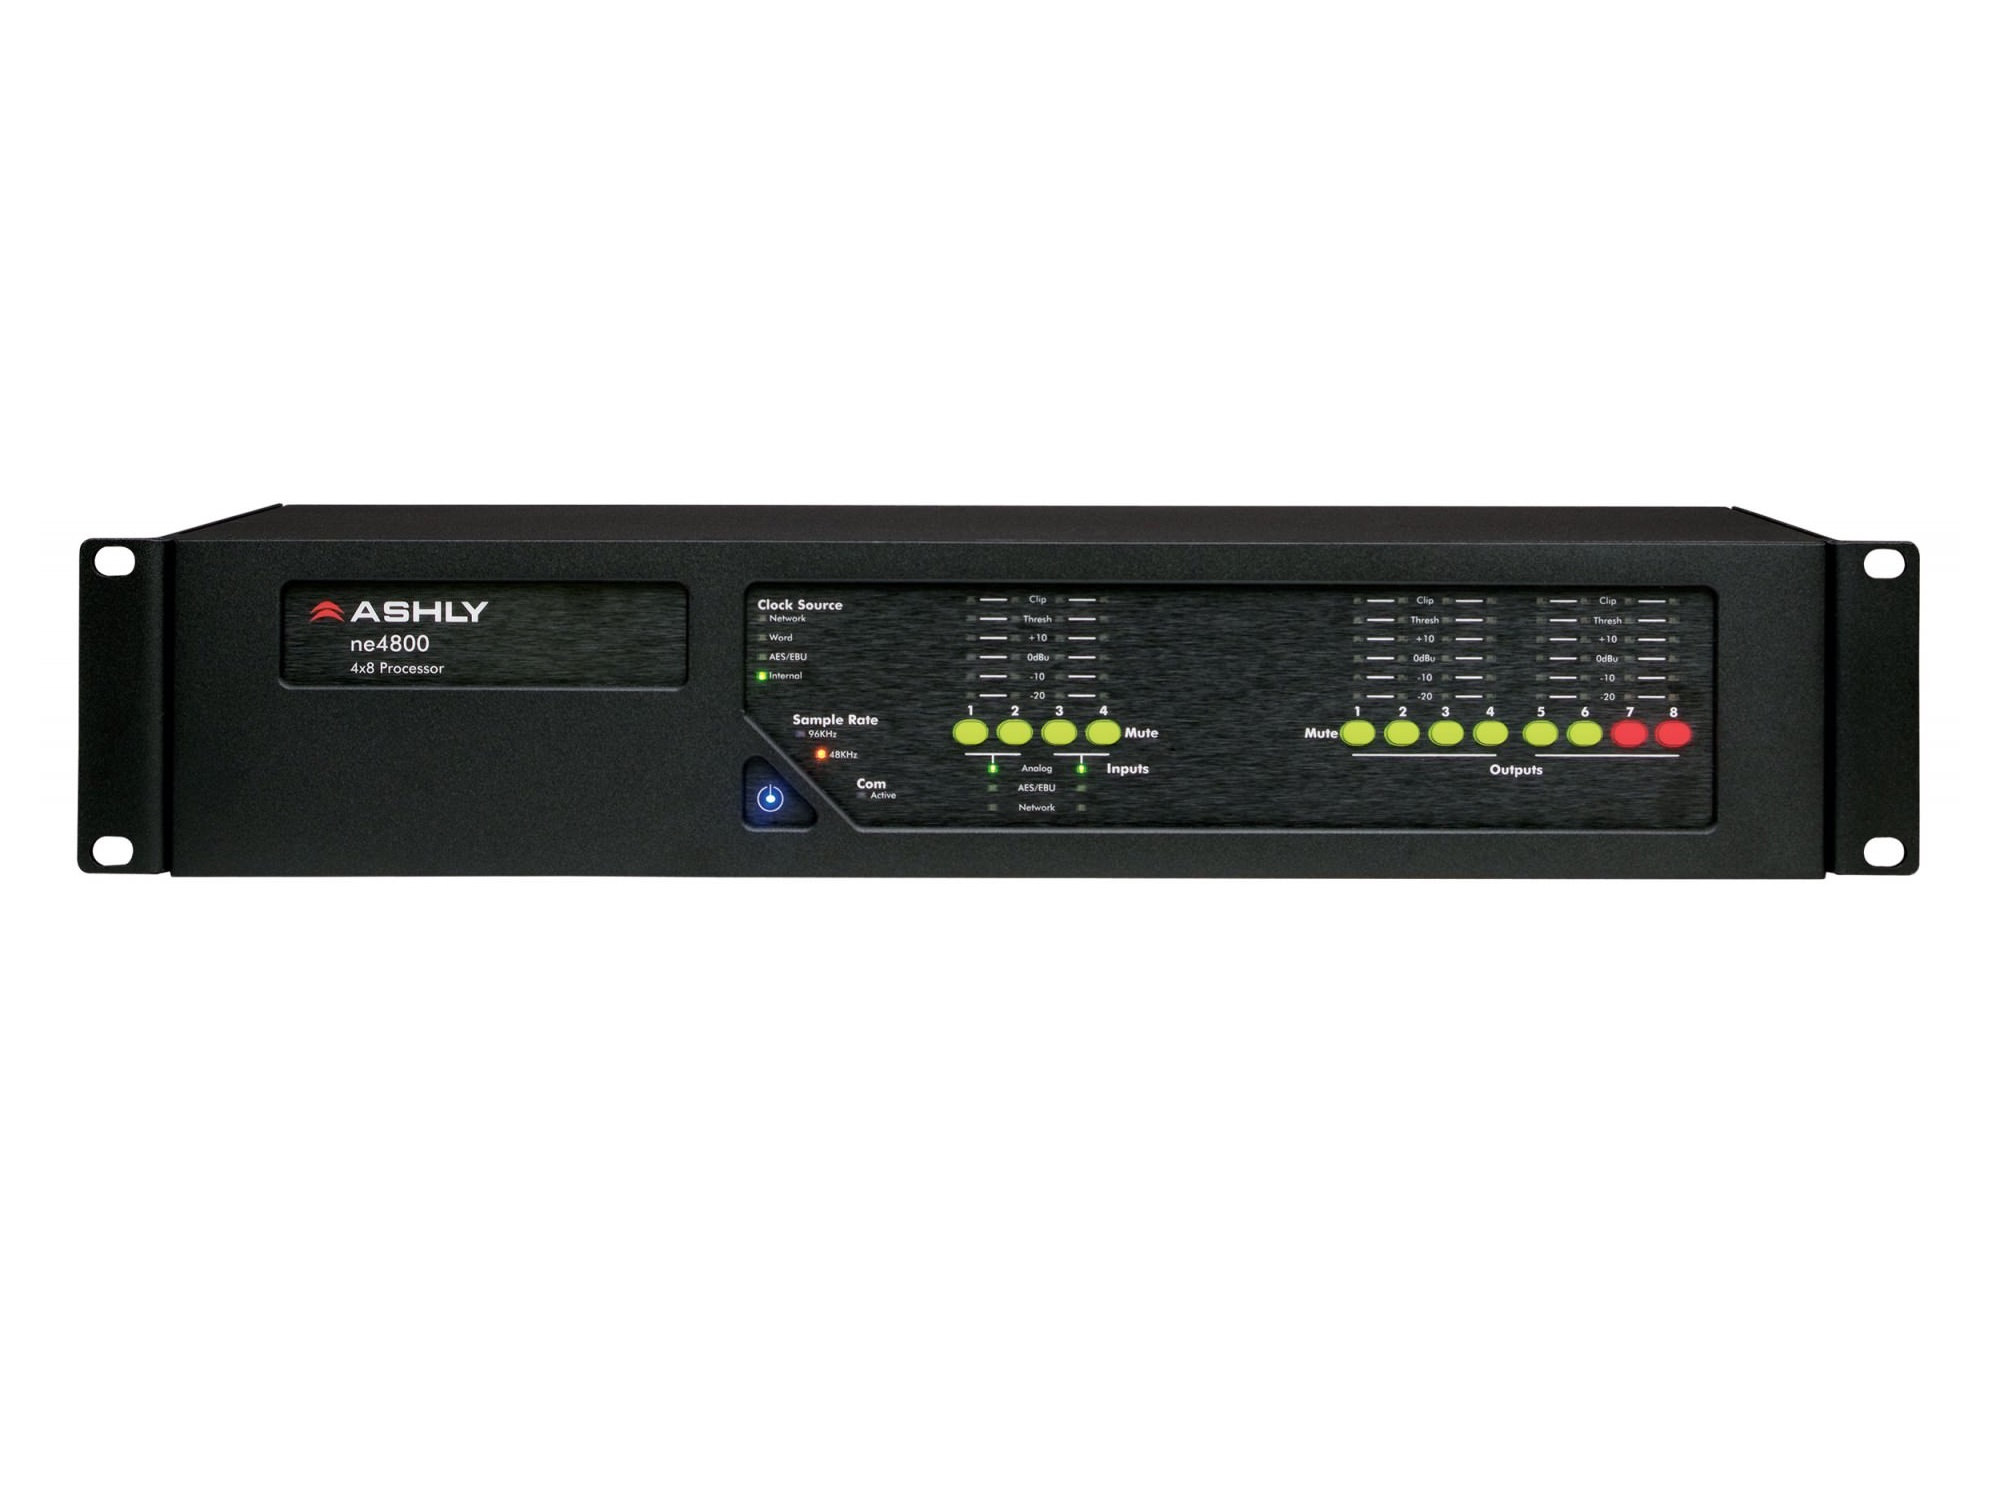 ne4800as ne4800 Network Protea System Processor plus 4-Chan AES3 Inputs and 8-Chan AES3 Outputs by Ashly